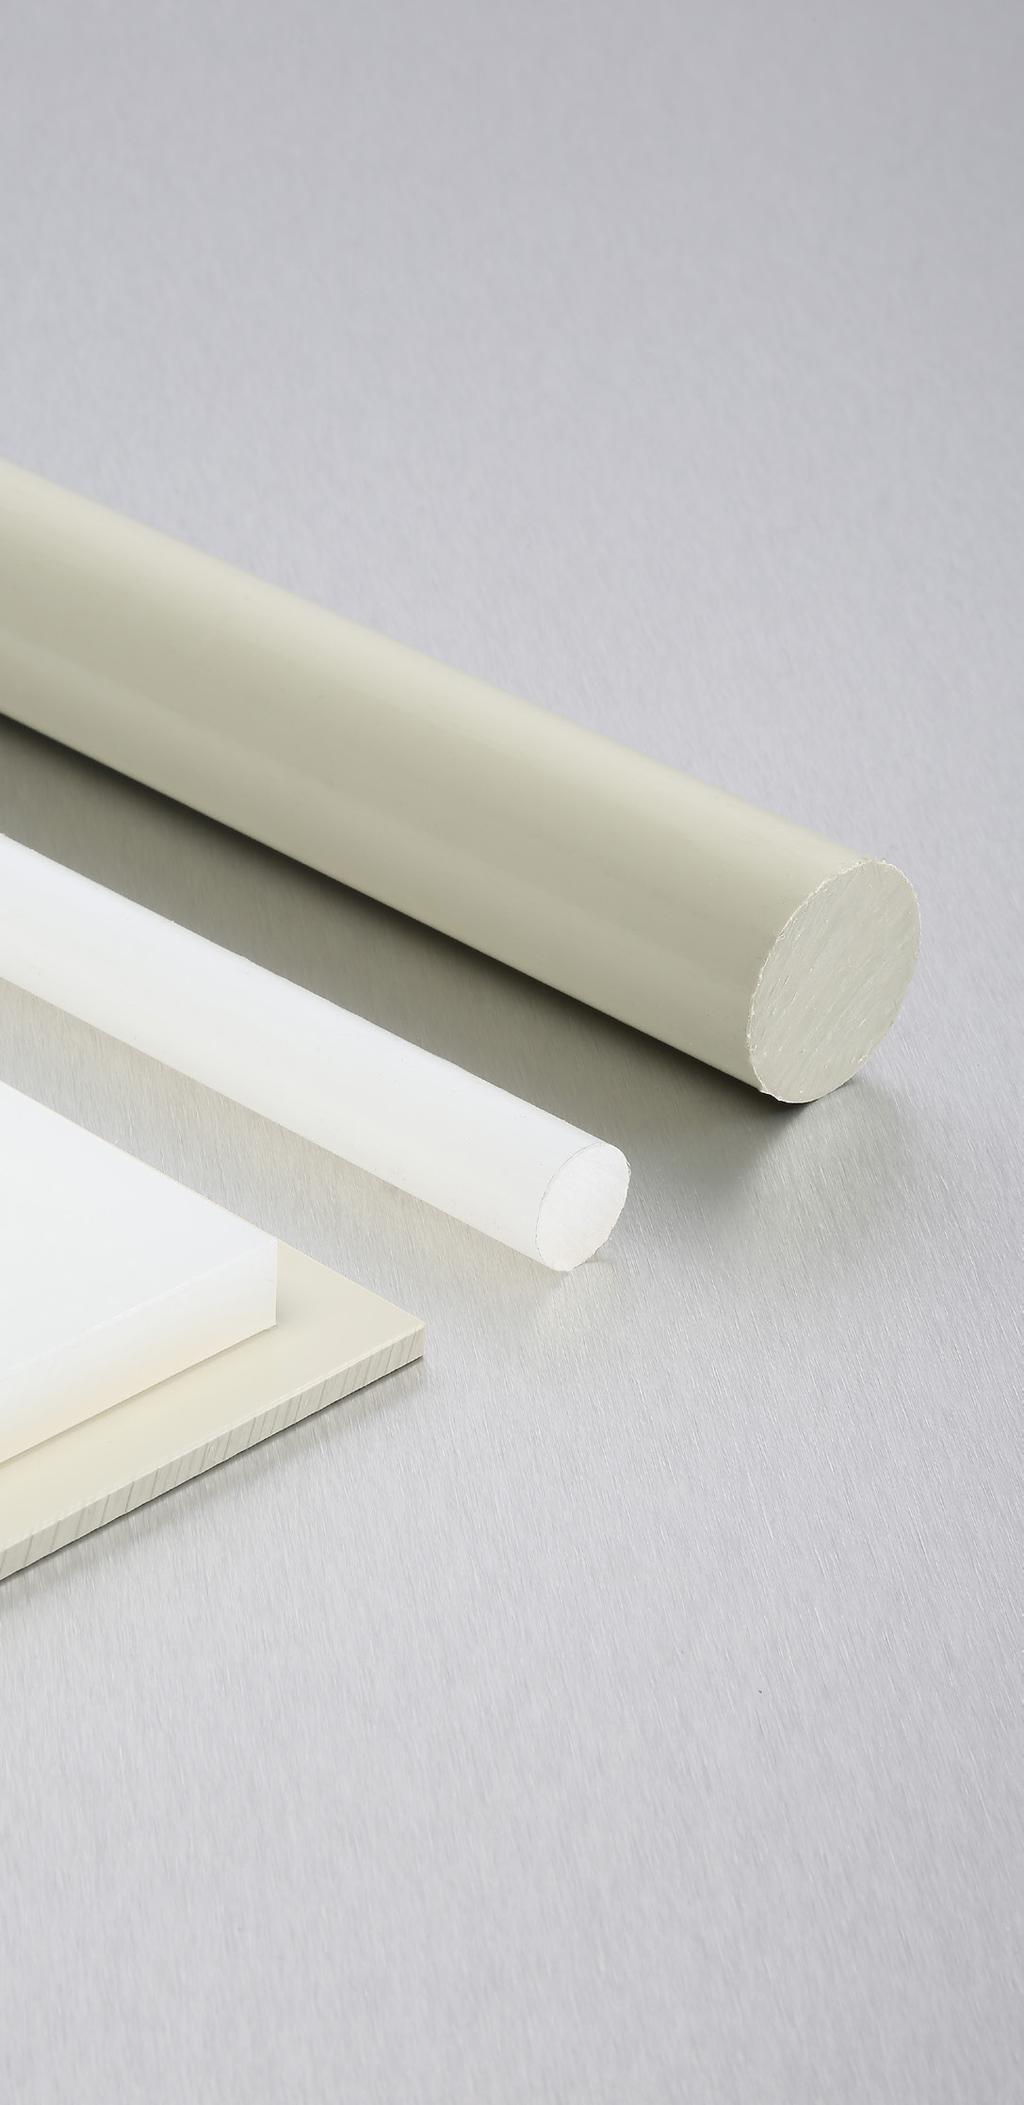 Product information Product full identity: Polypropylene Homopolymer PPH is light weight (SG 0.